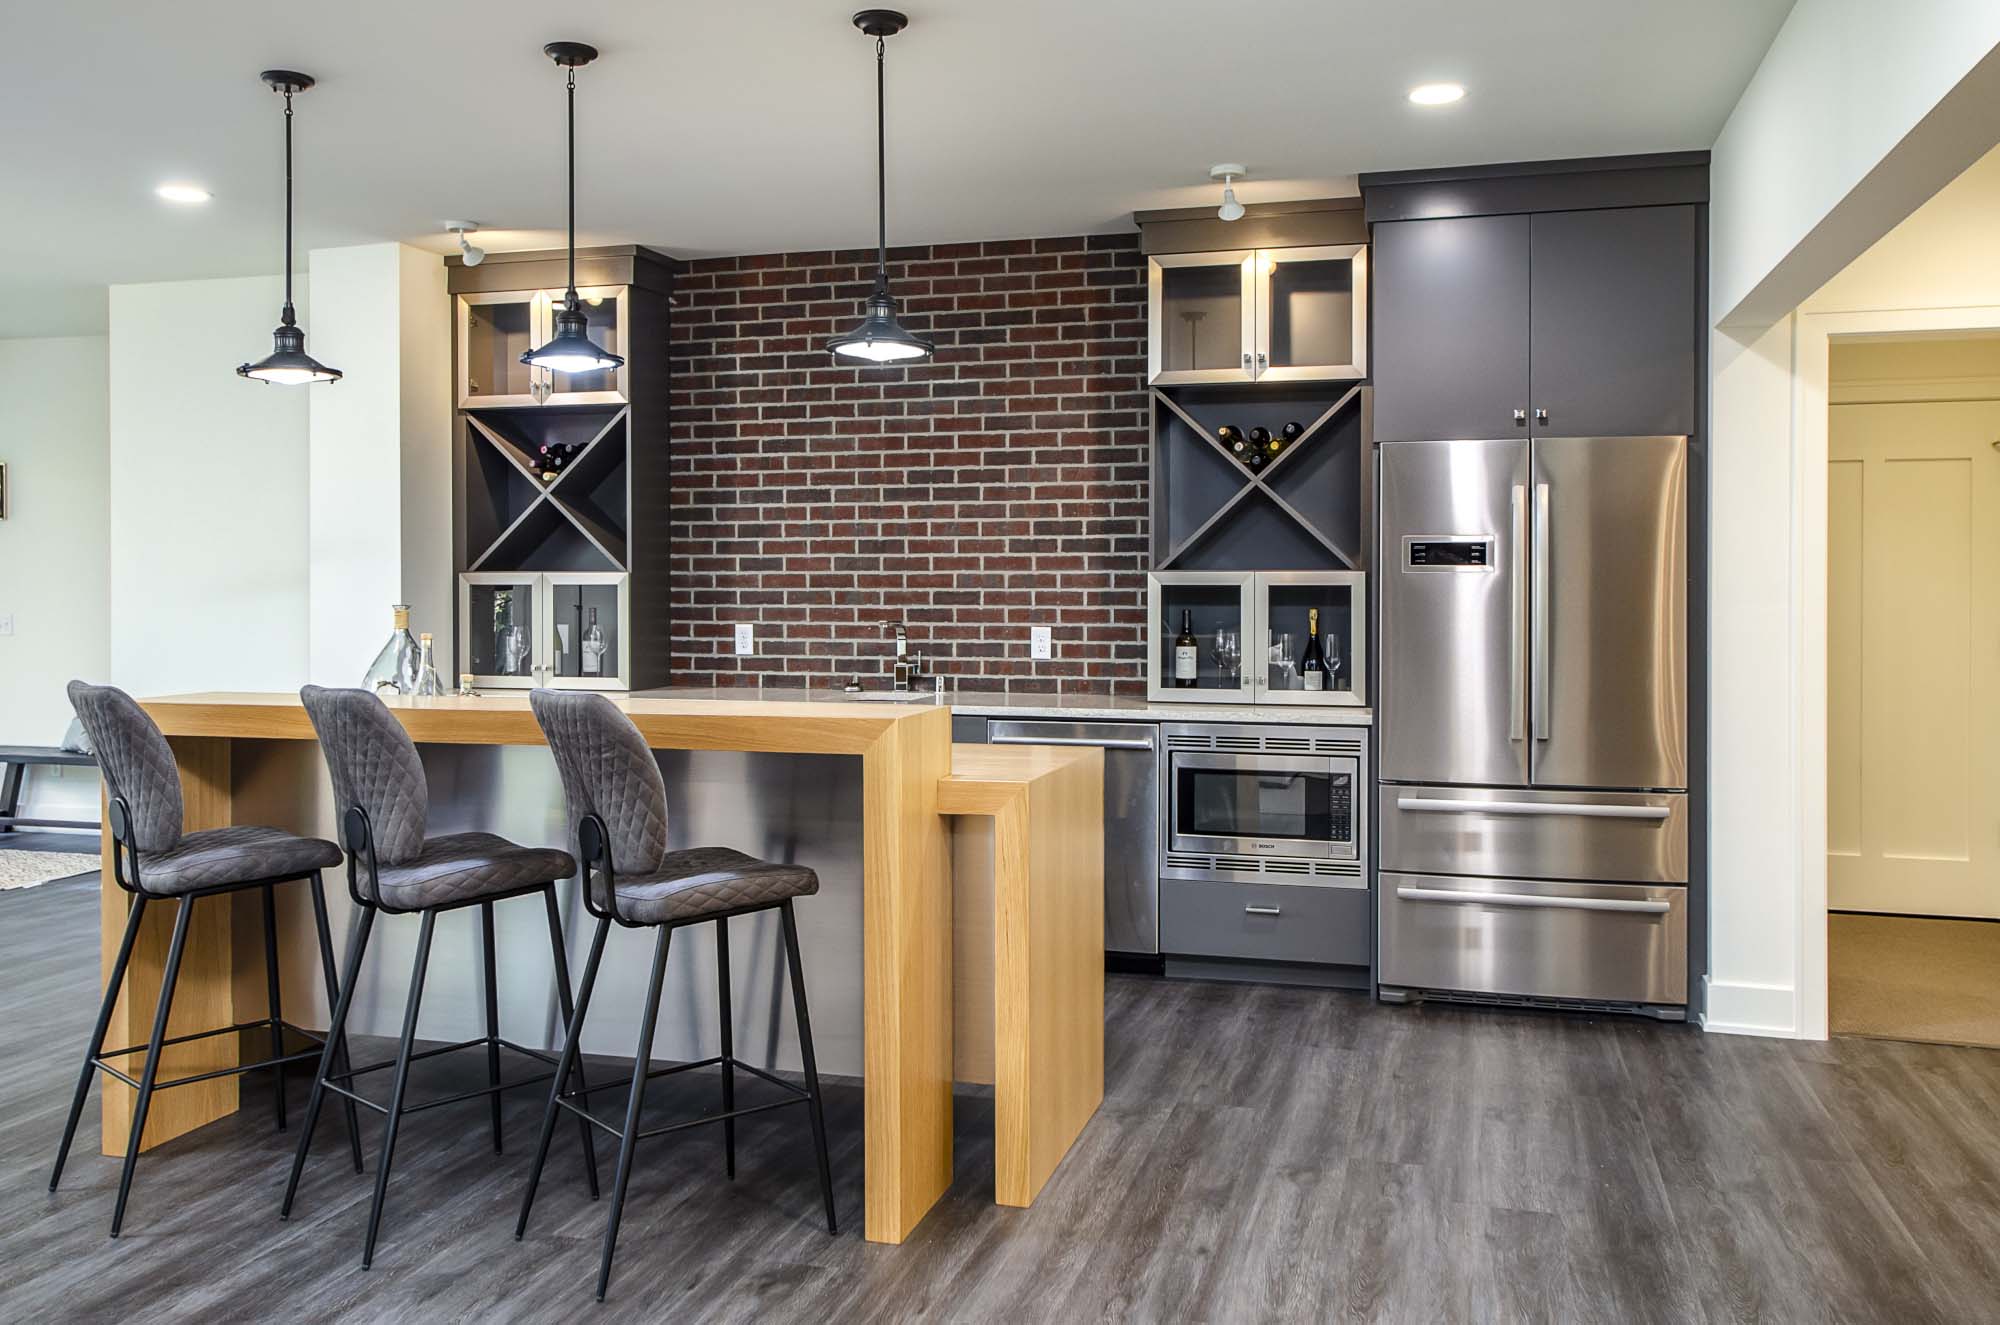 A kitchen with a brick wall and stainless steel appliances.